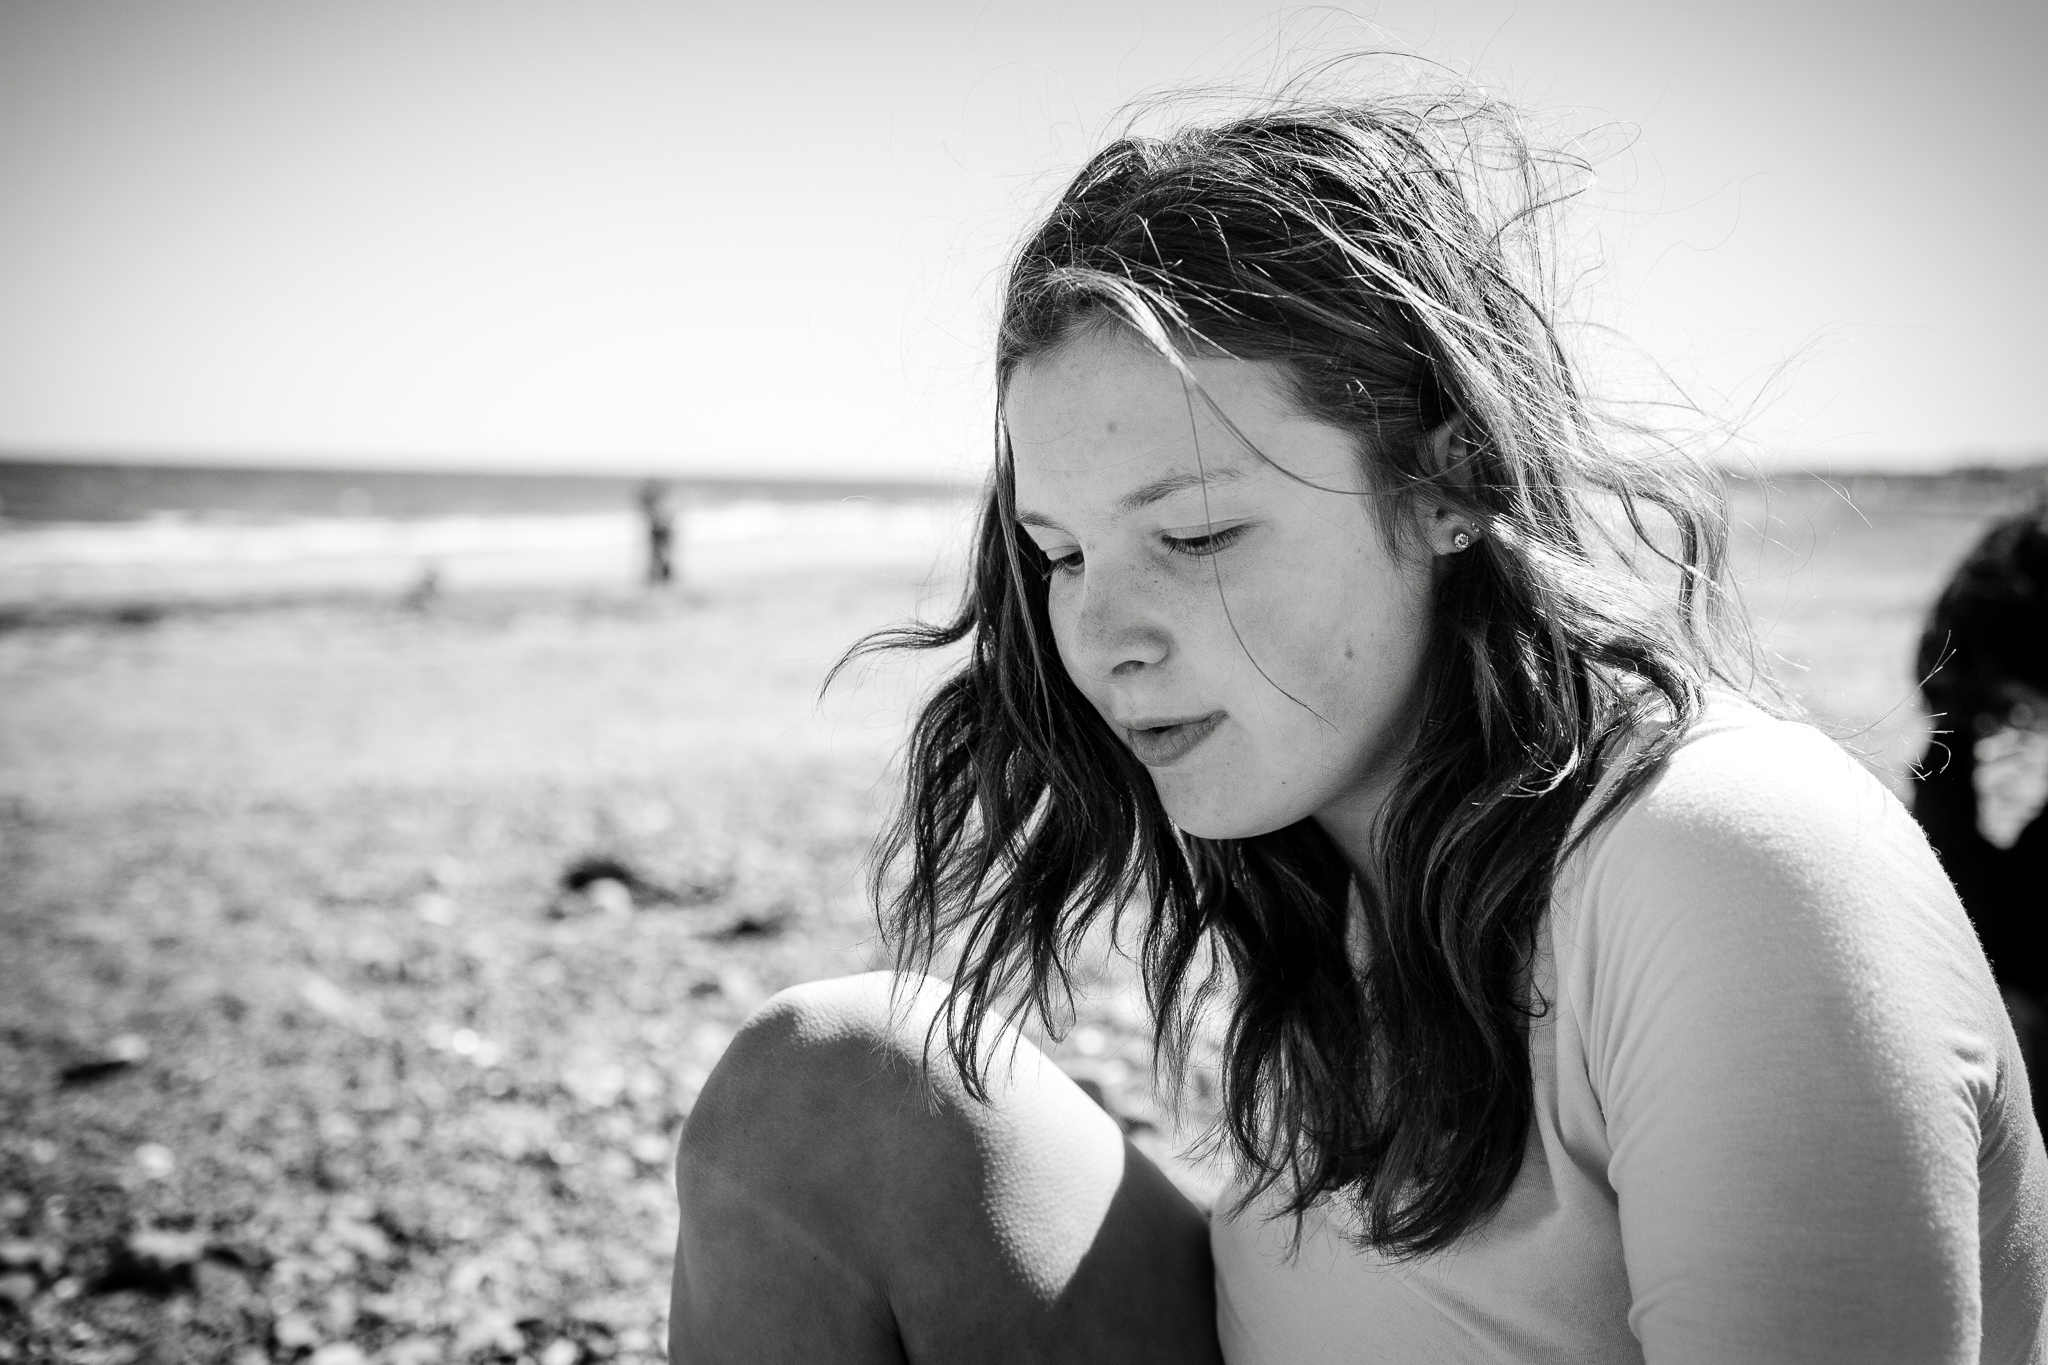 teenager sitting on beach with hair blowing